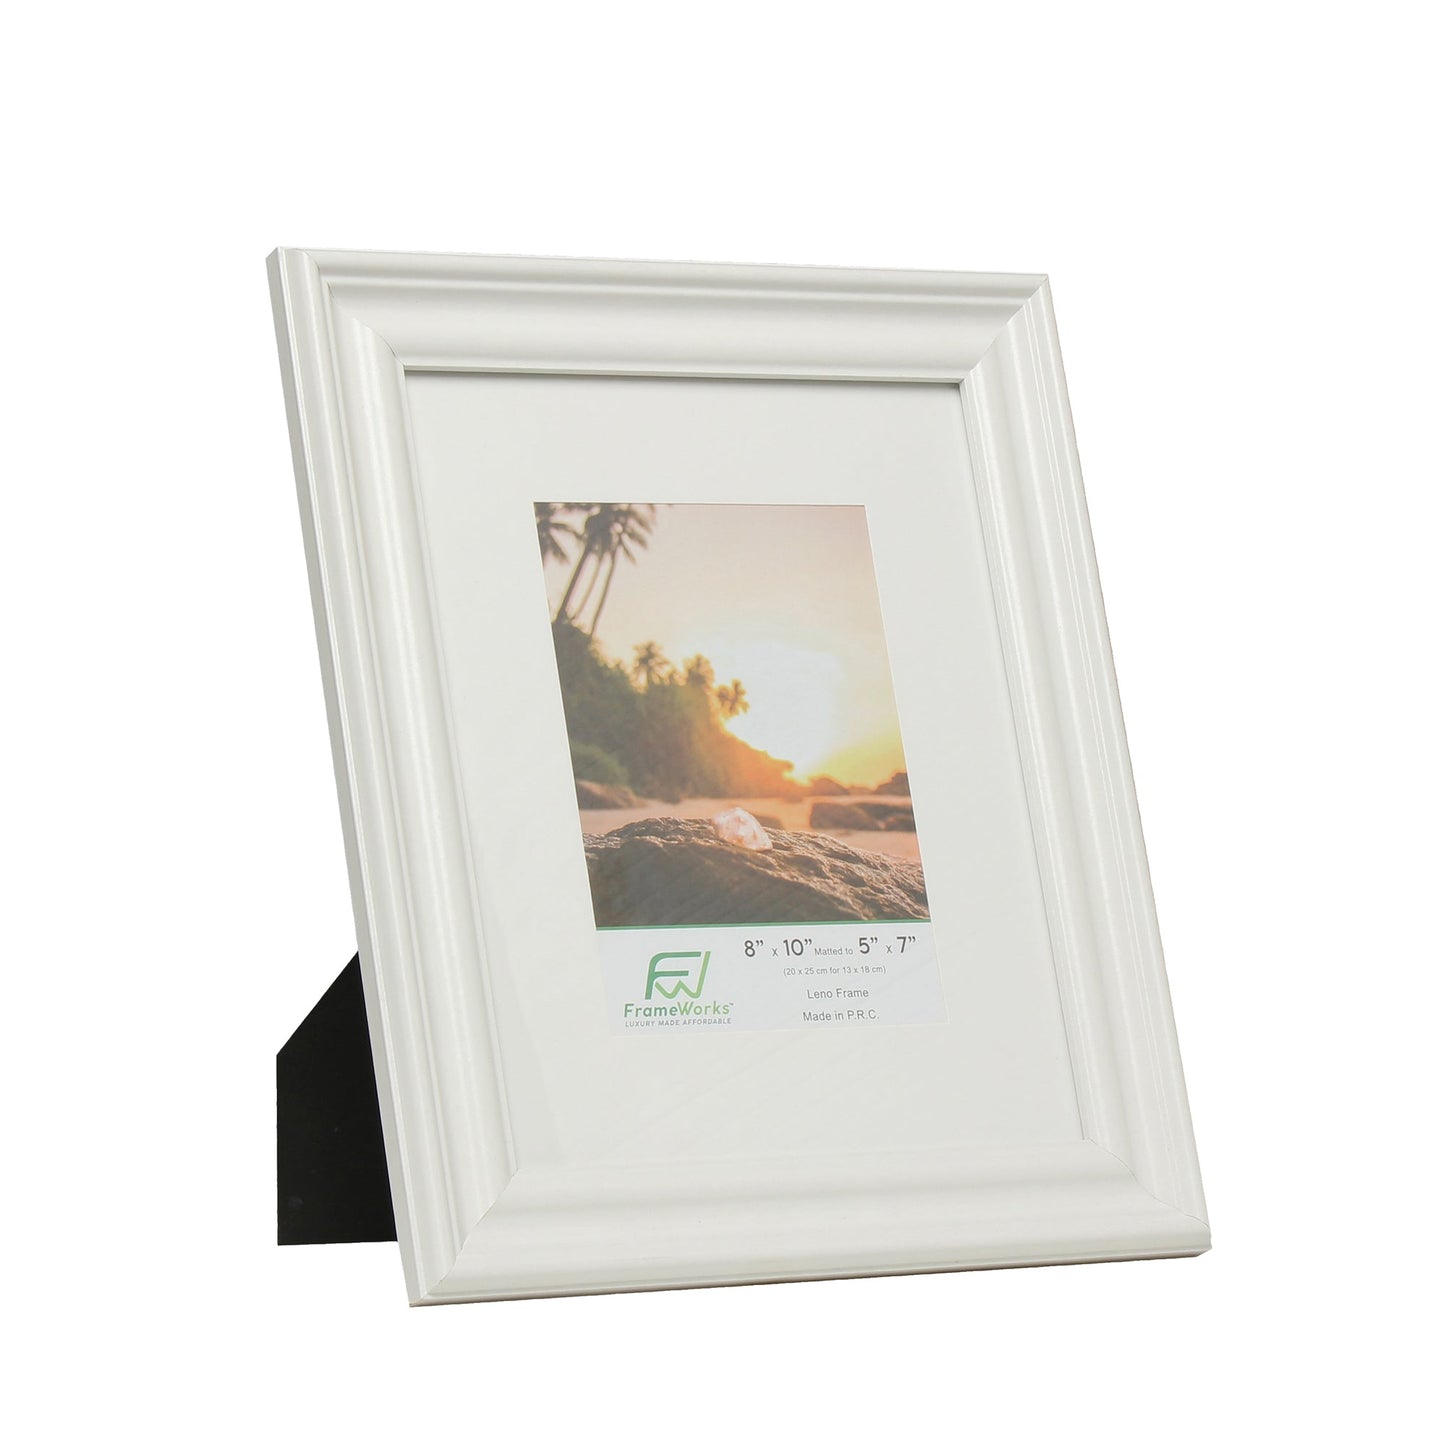 8" x 10" White Wood 2-Pack Picture Frames with Molded Edges, 5" x 7" Matted